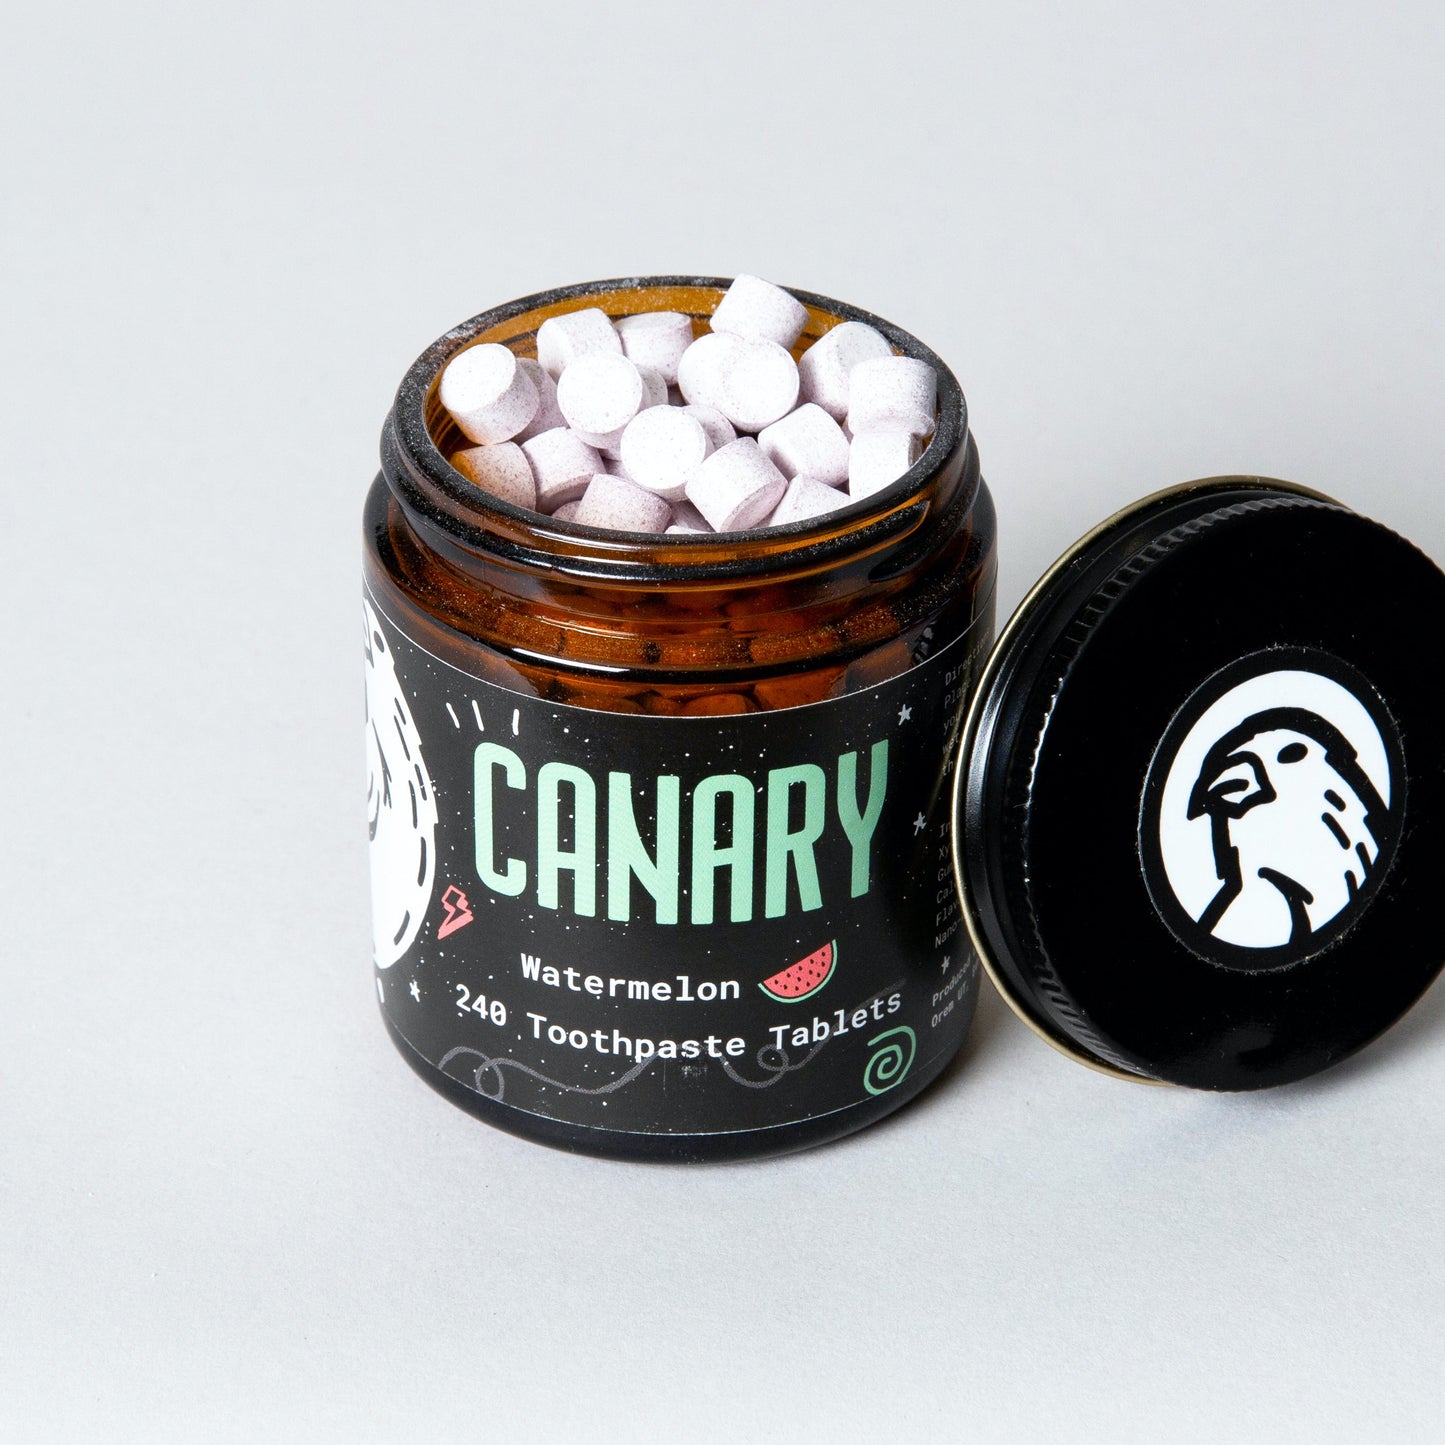 watermelon toothpaste tablets by canary